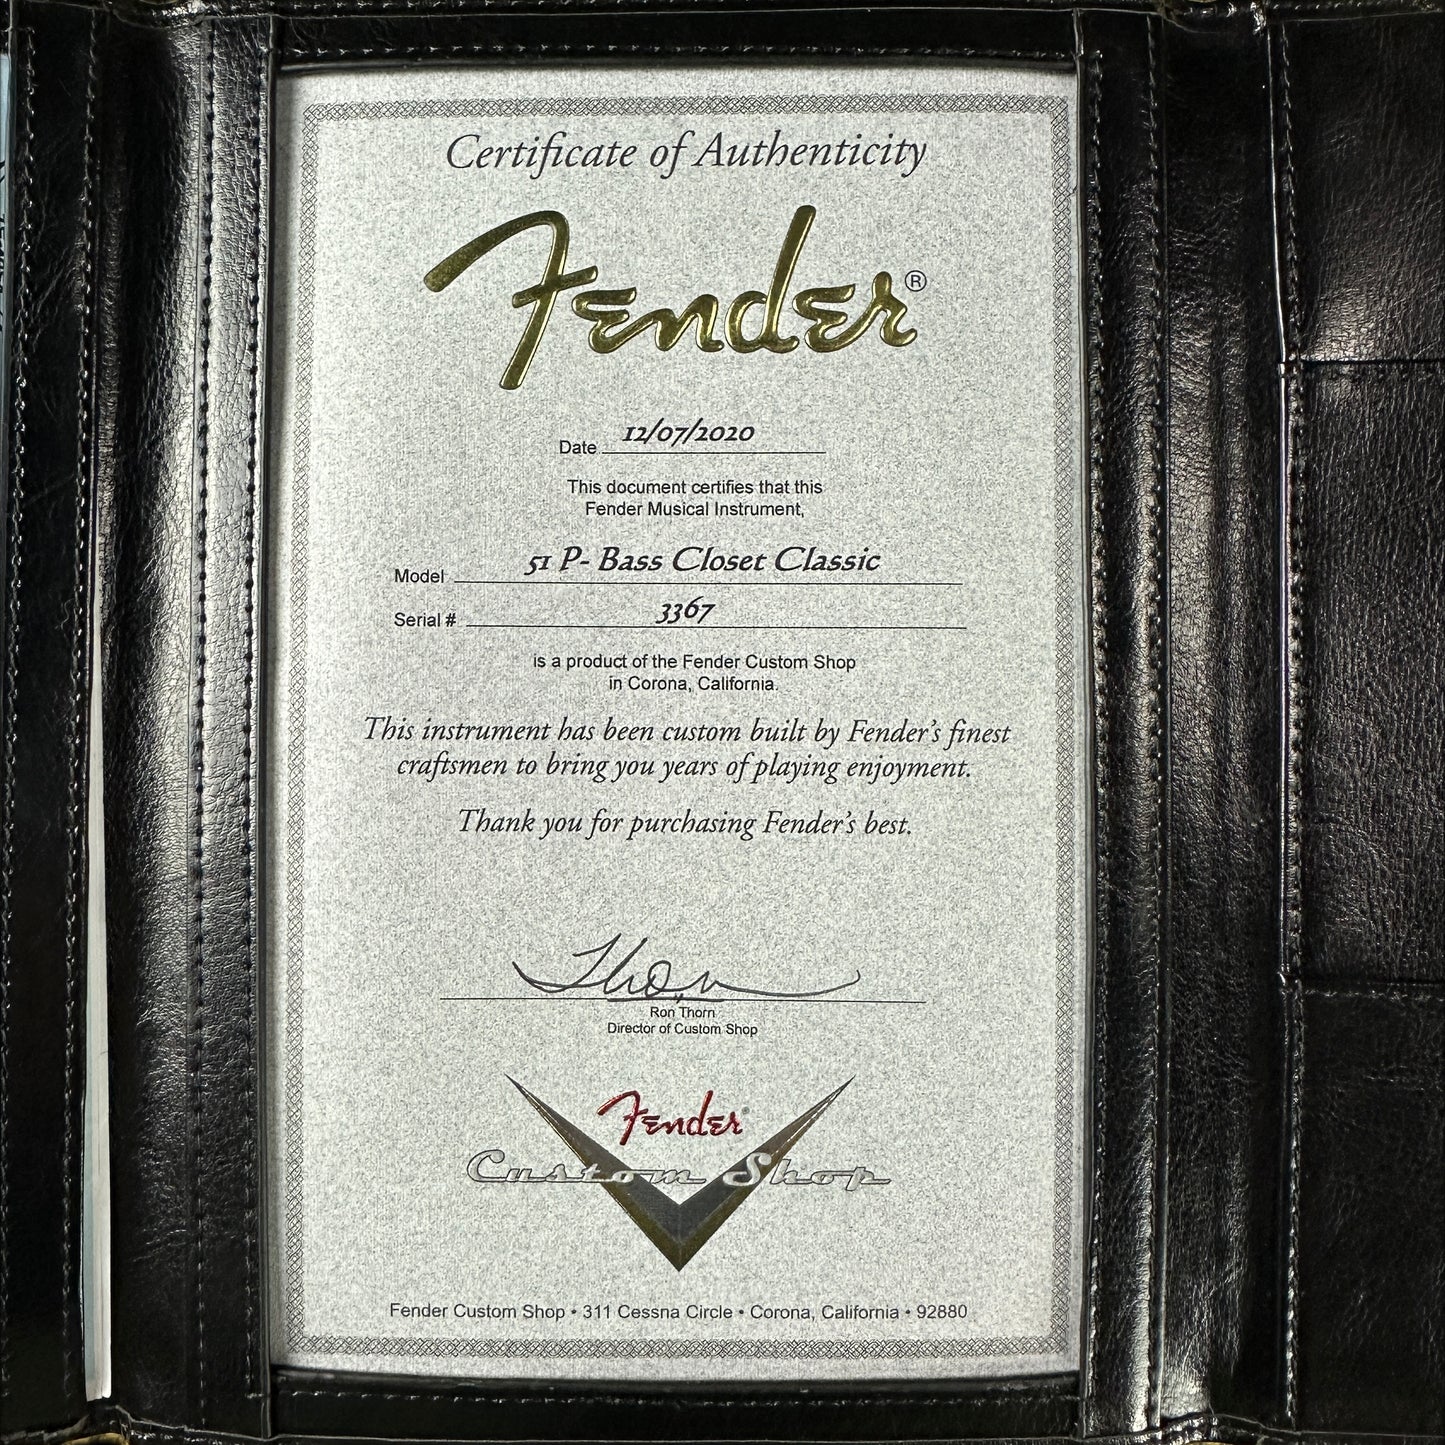 Certificate of authenticity for Used Fender Custom Shop '51 Precision Bass Closet Classic.